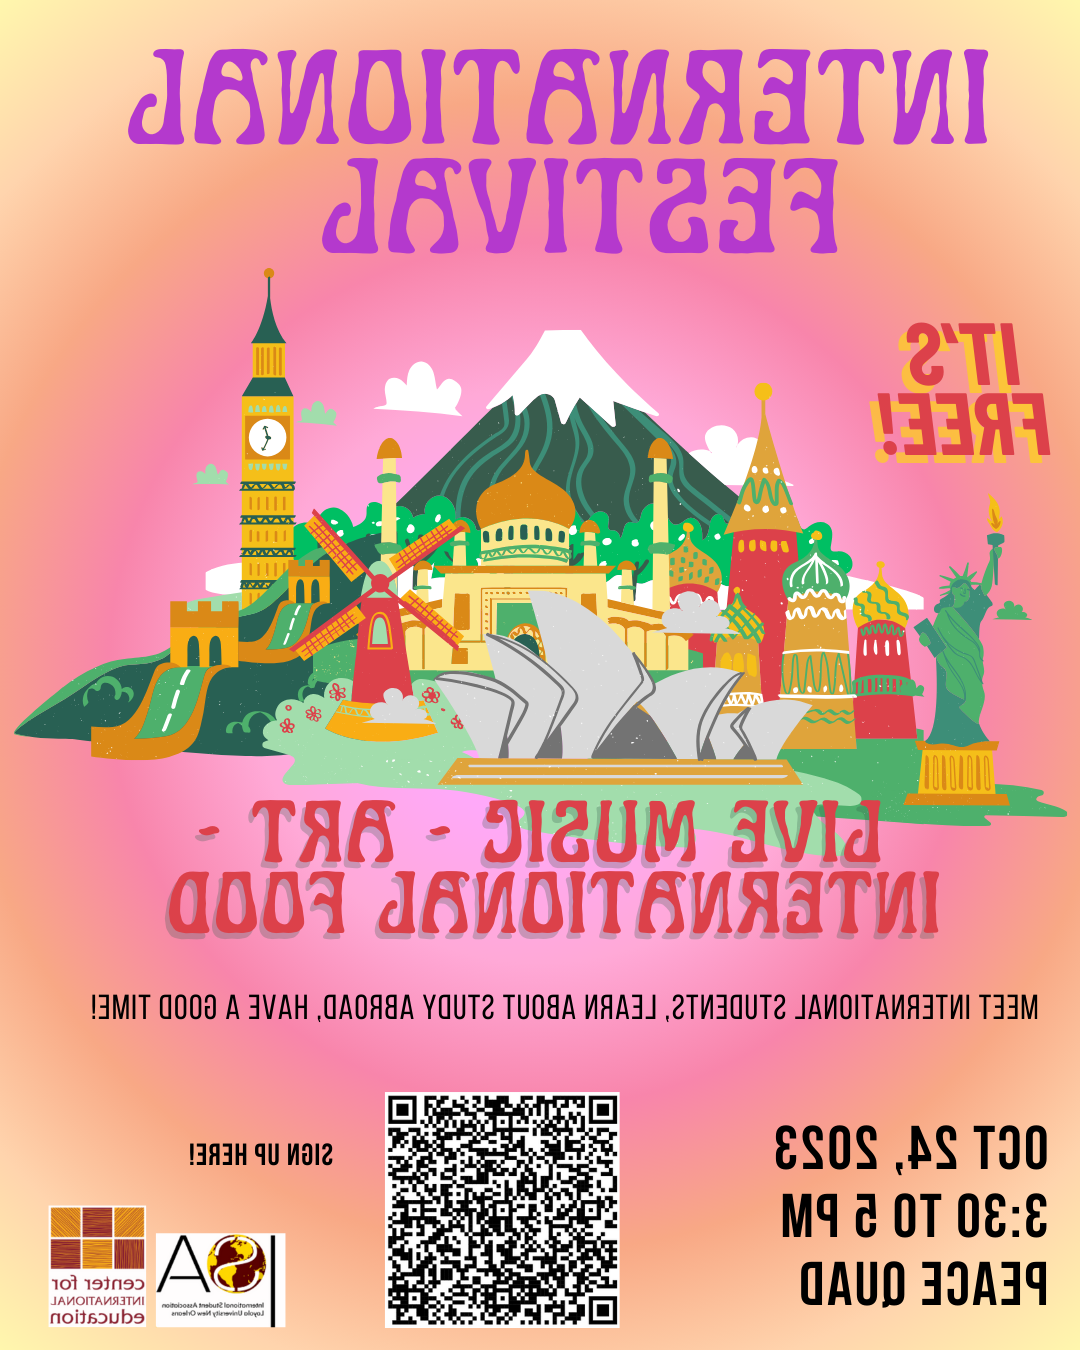 Flyer for festival with QR code link for interested students to apply for a table!